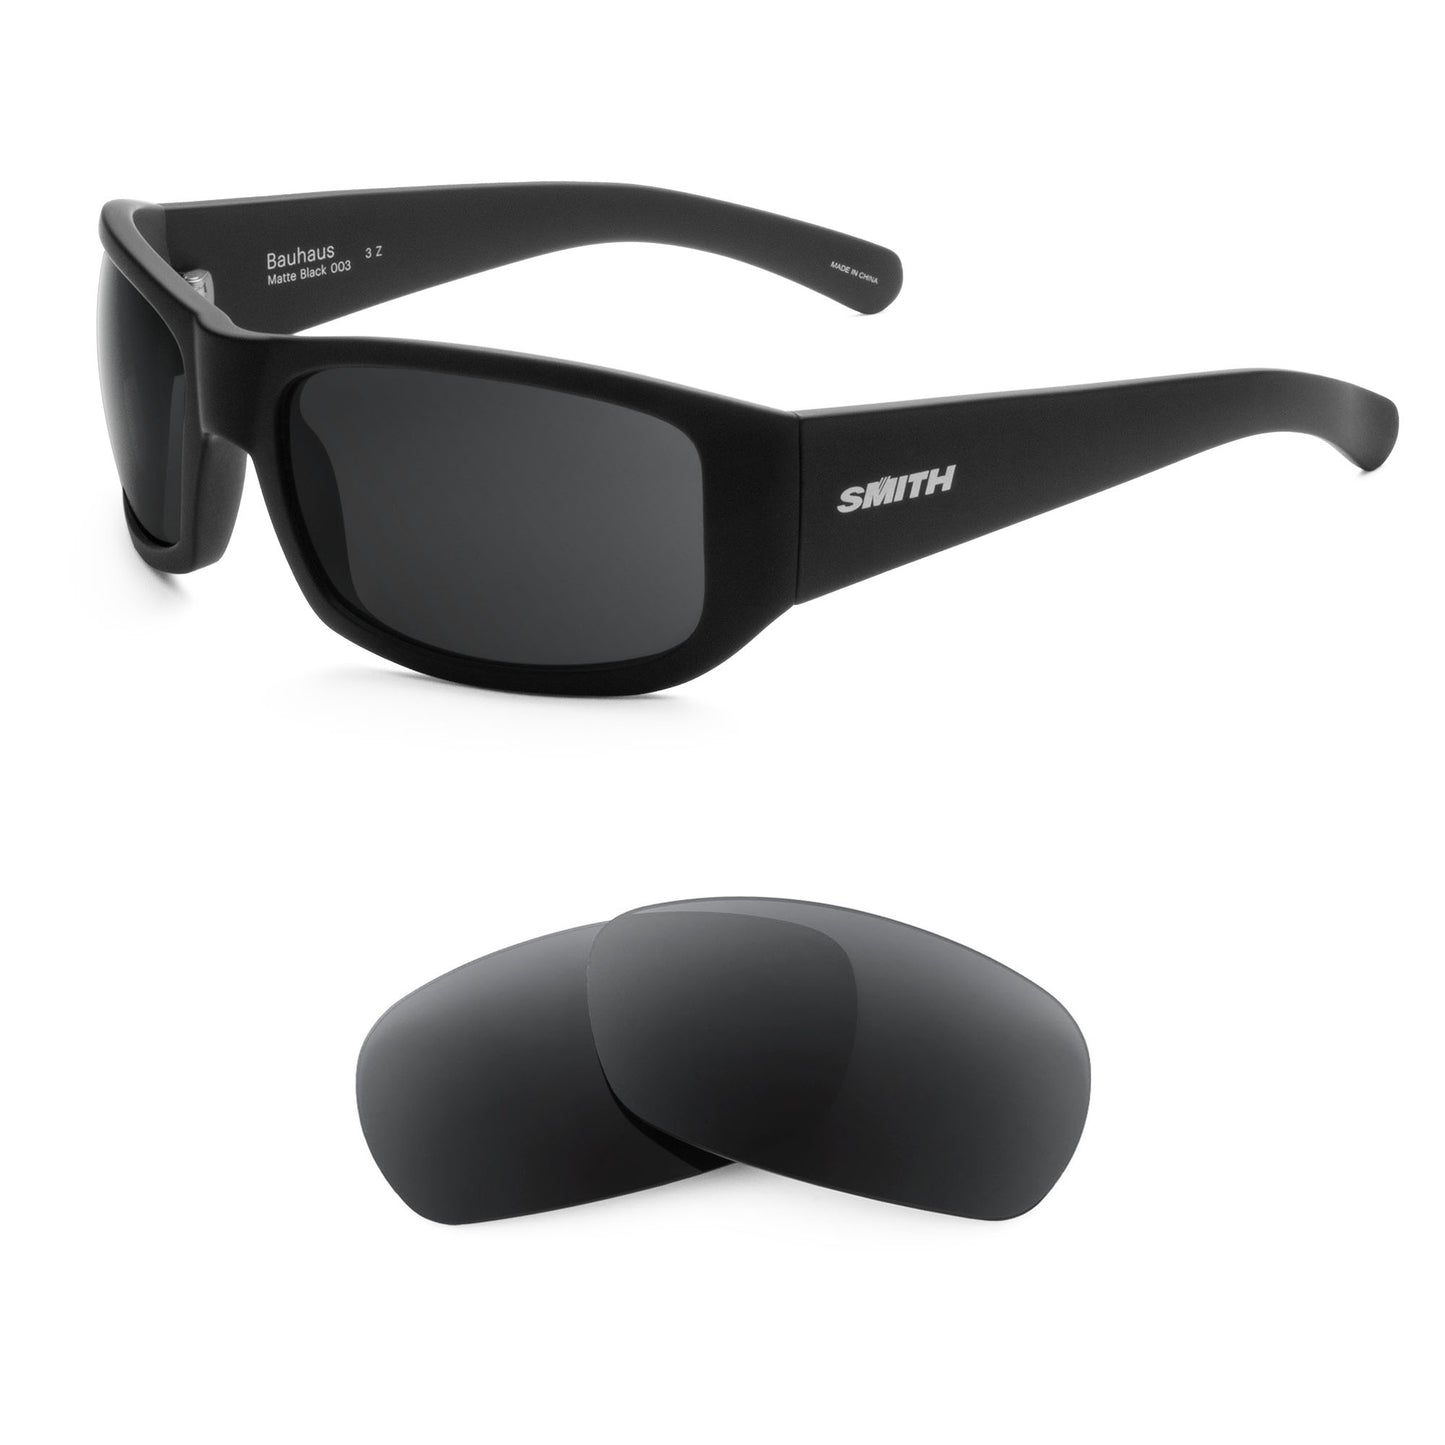 Smith Bauhaus sunglasses with replacement lenses